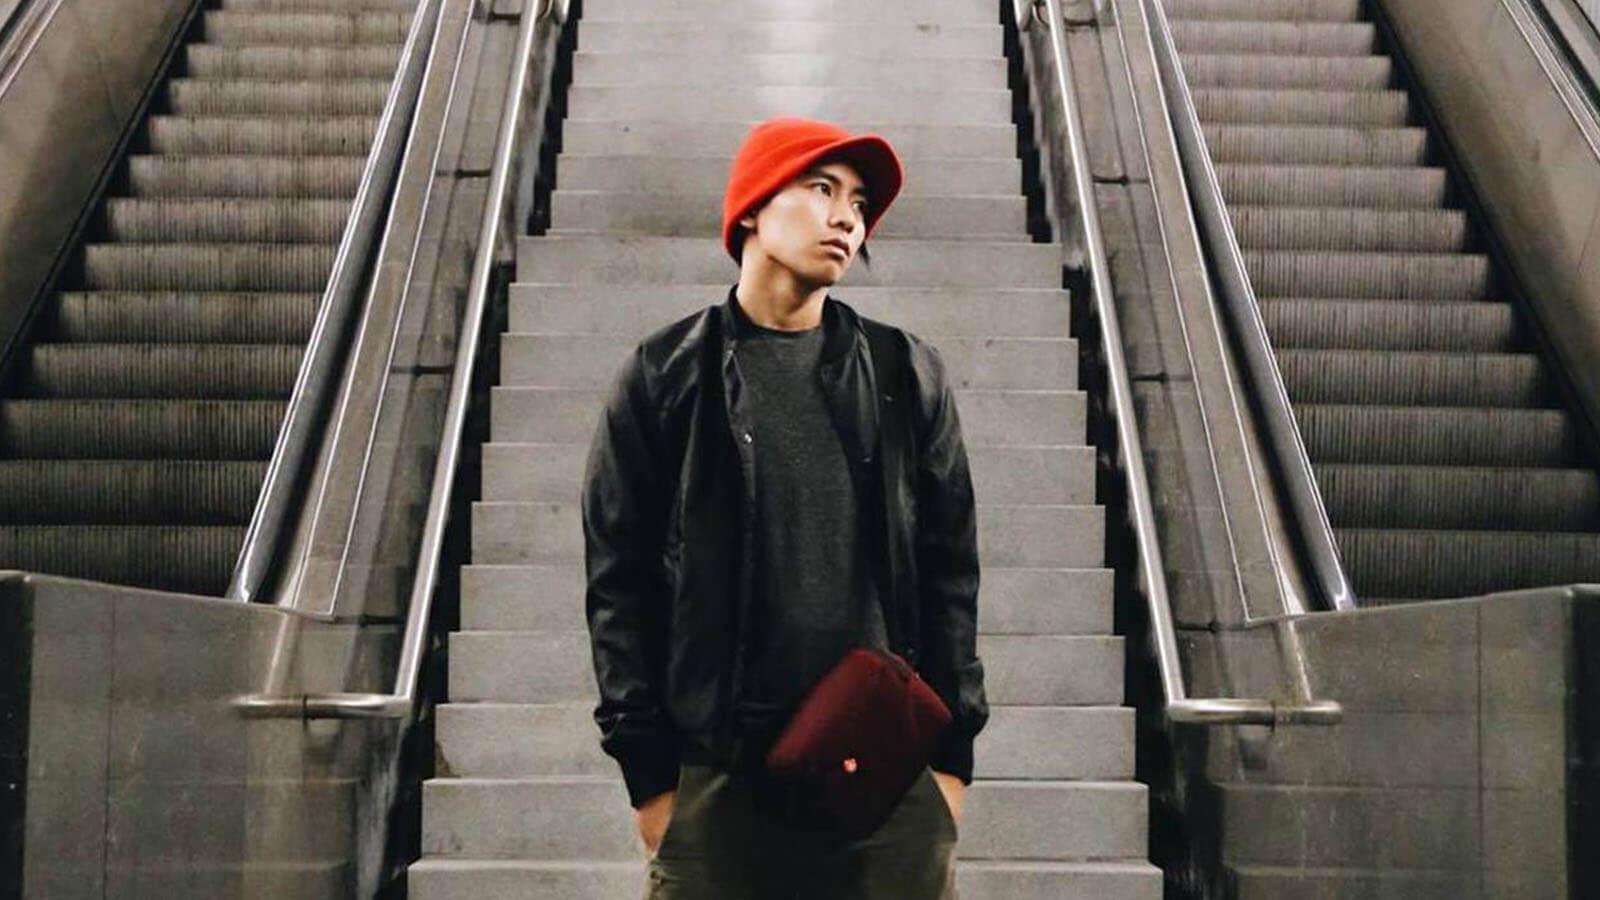 A young Asian man wearing a red knit cap, black jacket and shirt, green pants, and a burgundy bag stands between two escalators. His hands are in his pockets and he is looking off to the left.